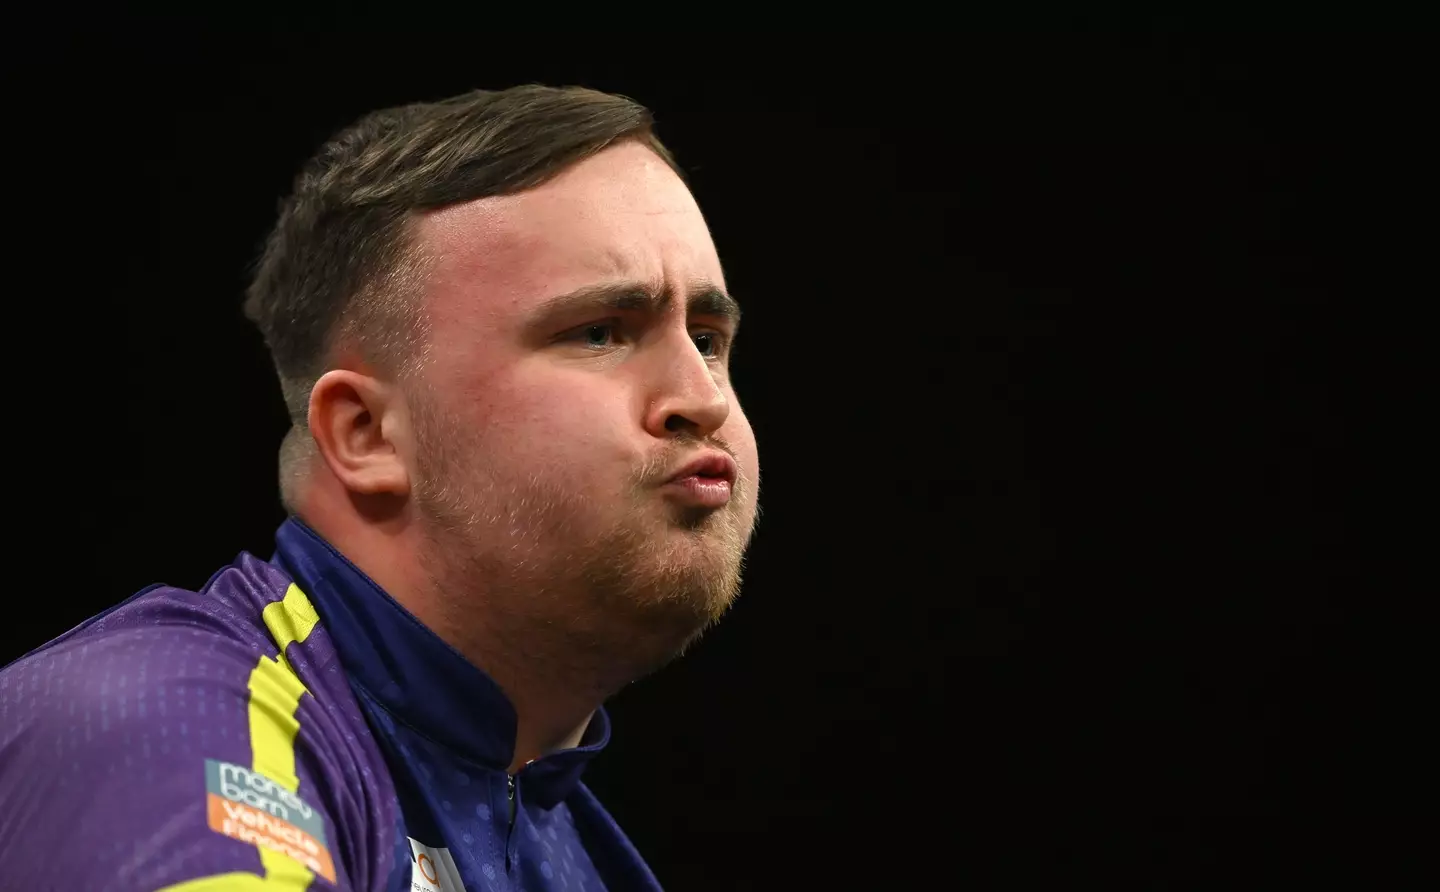 Luke Littler has become one of the biggest names in darts (Getty)